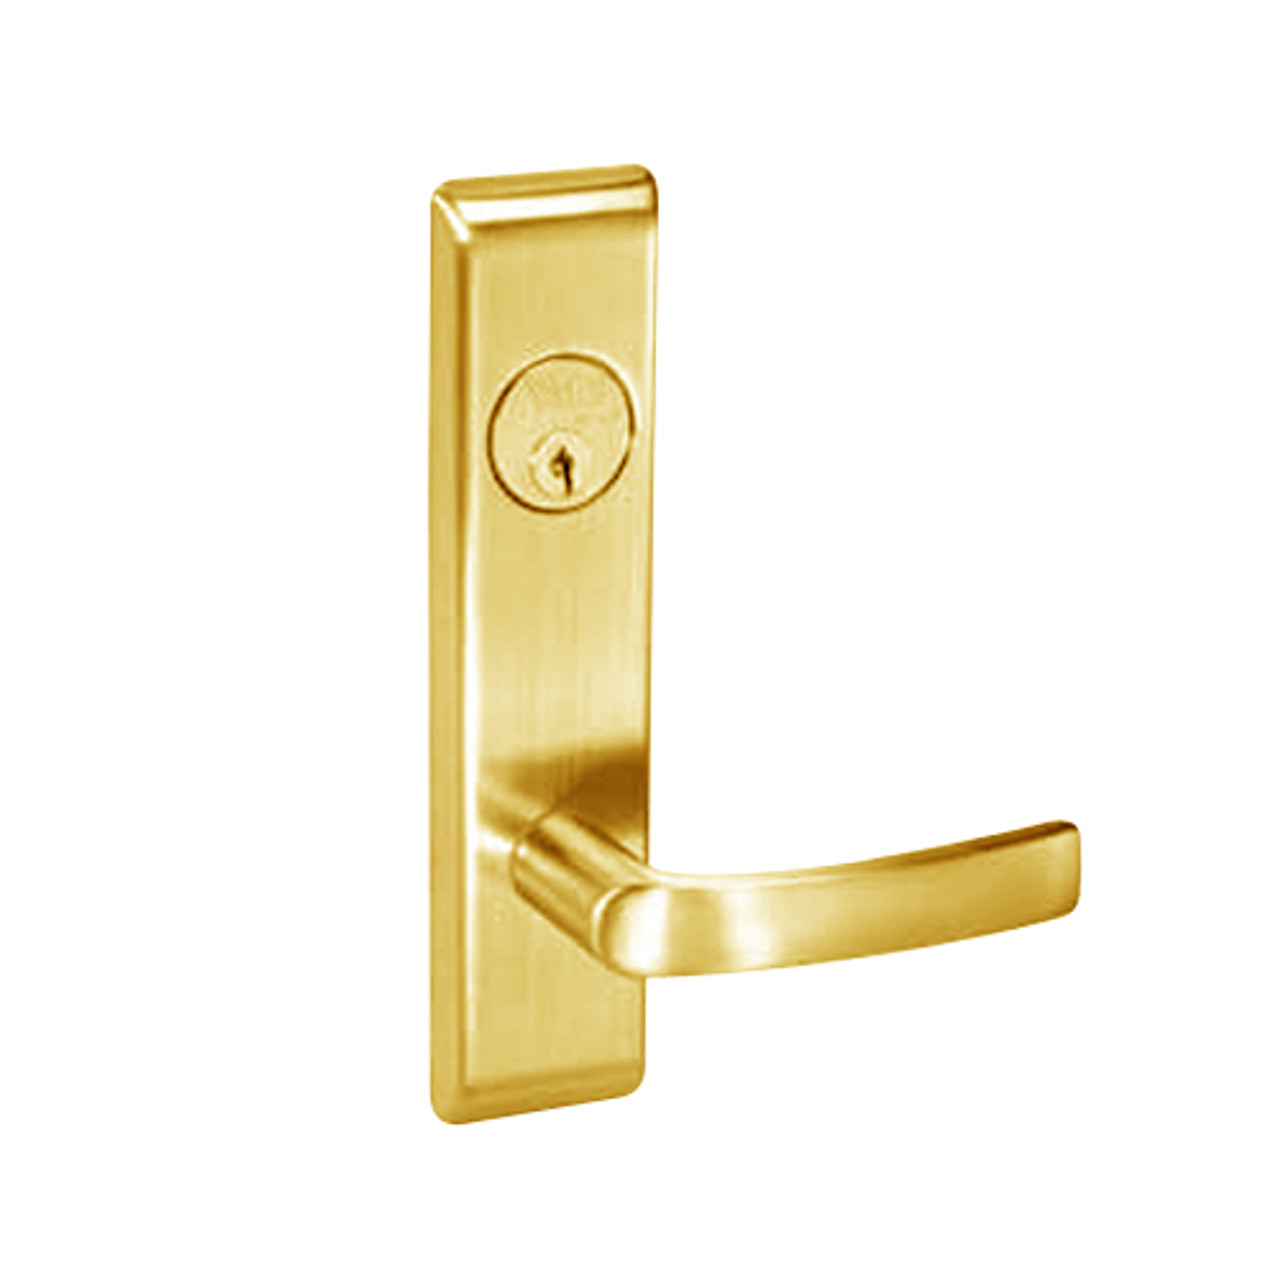 MOCN8864FL-605 Yale 8800FL Series Single Cylinder Mortise Bathroom Lock with Indicator with Monroe Lever in Bright Brass